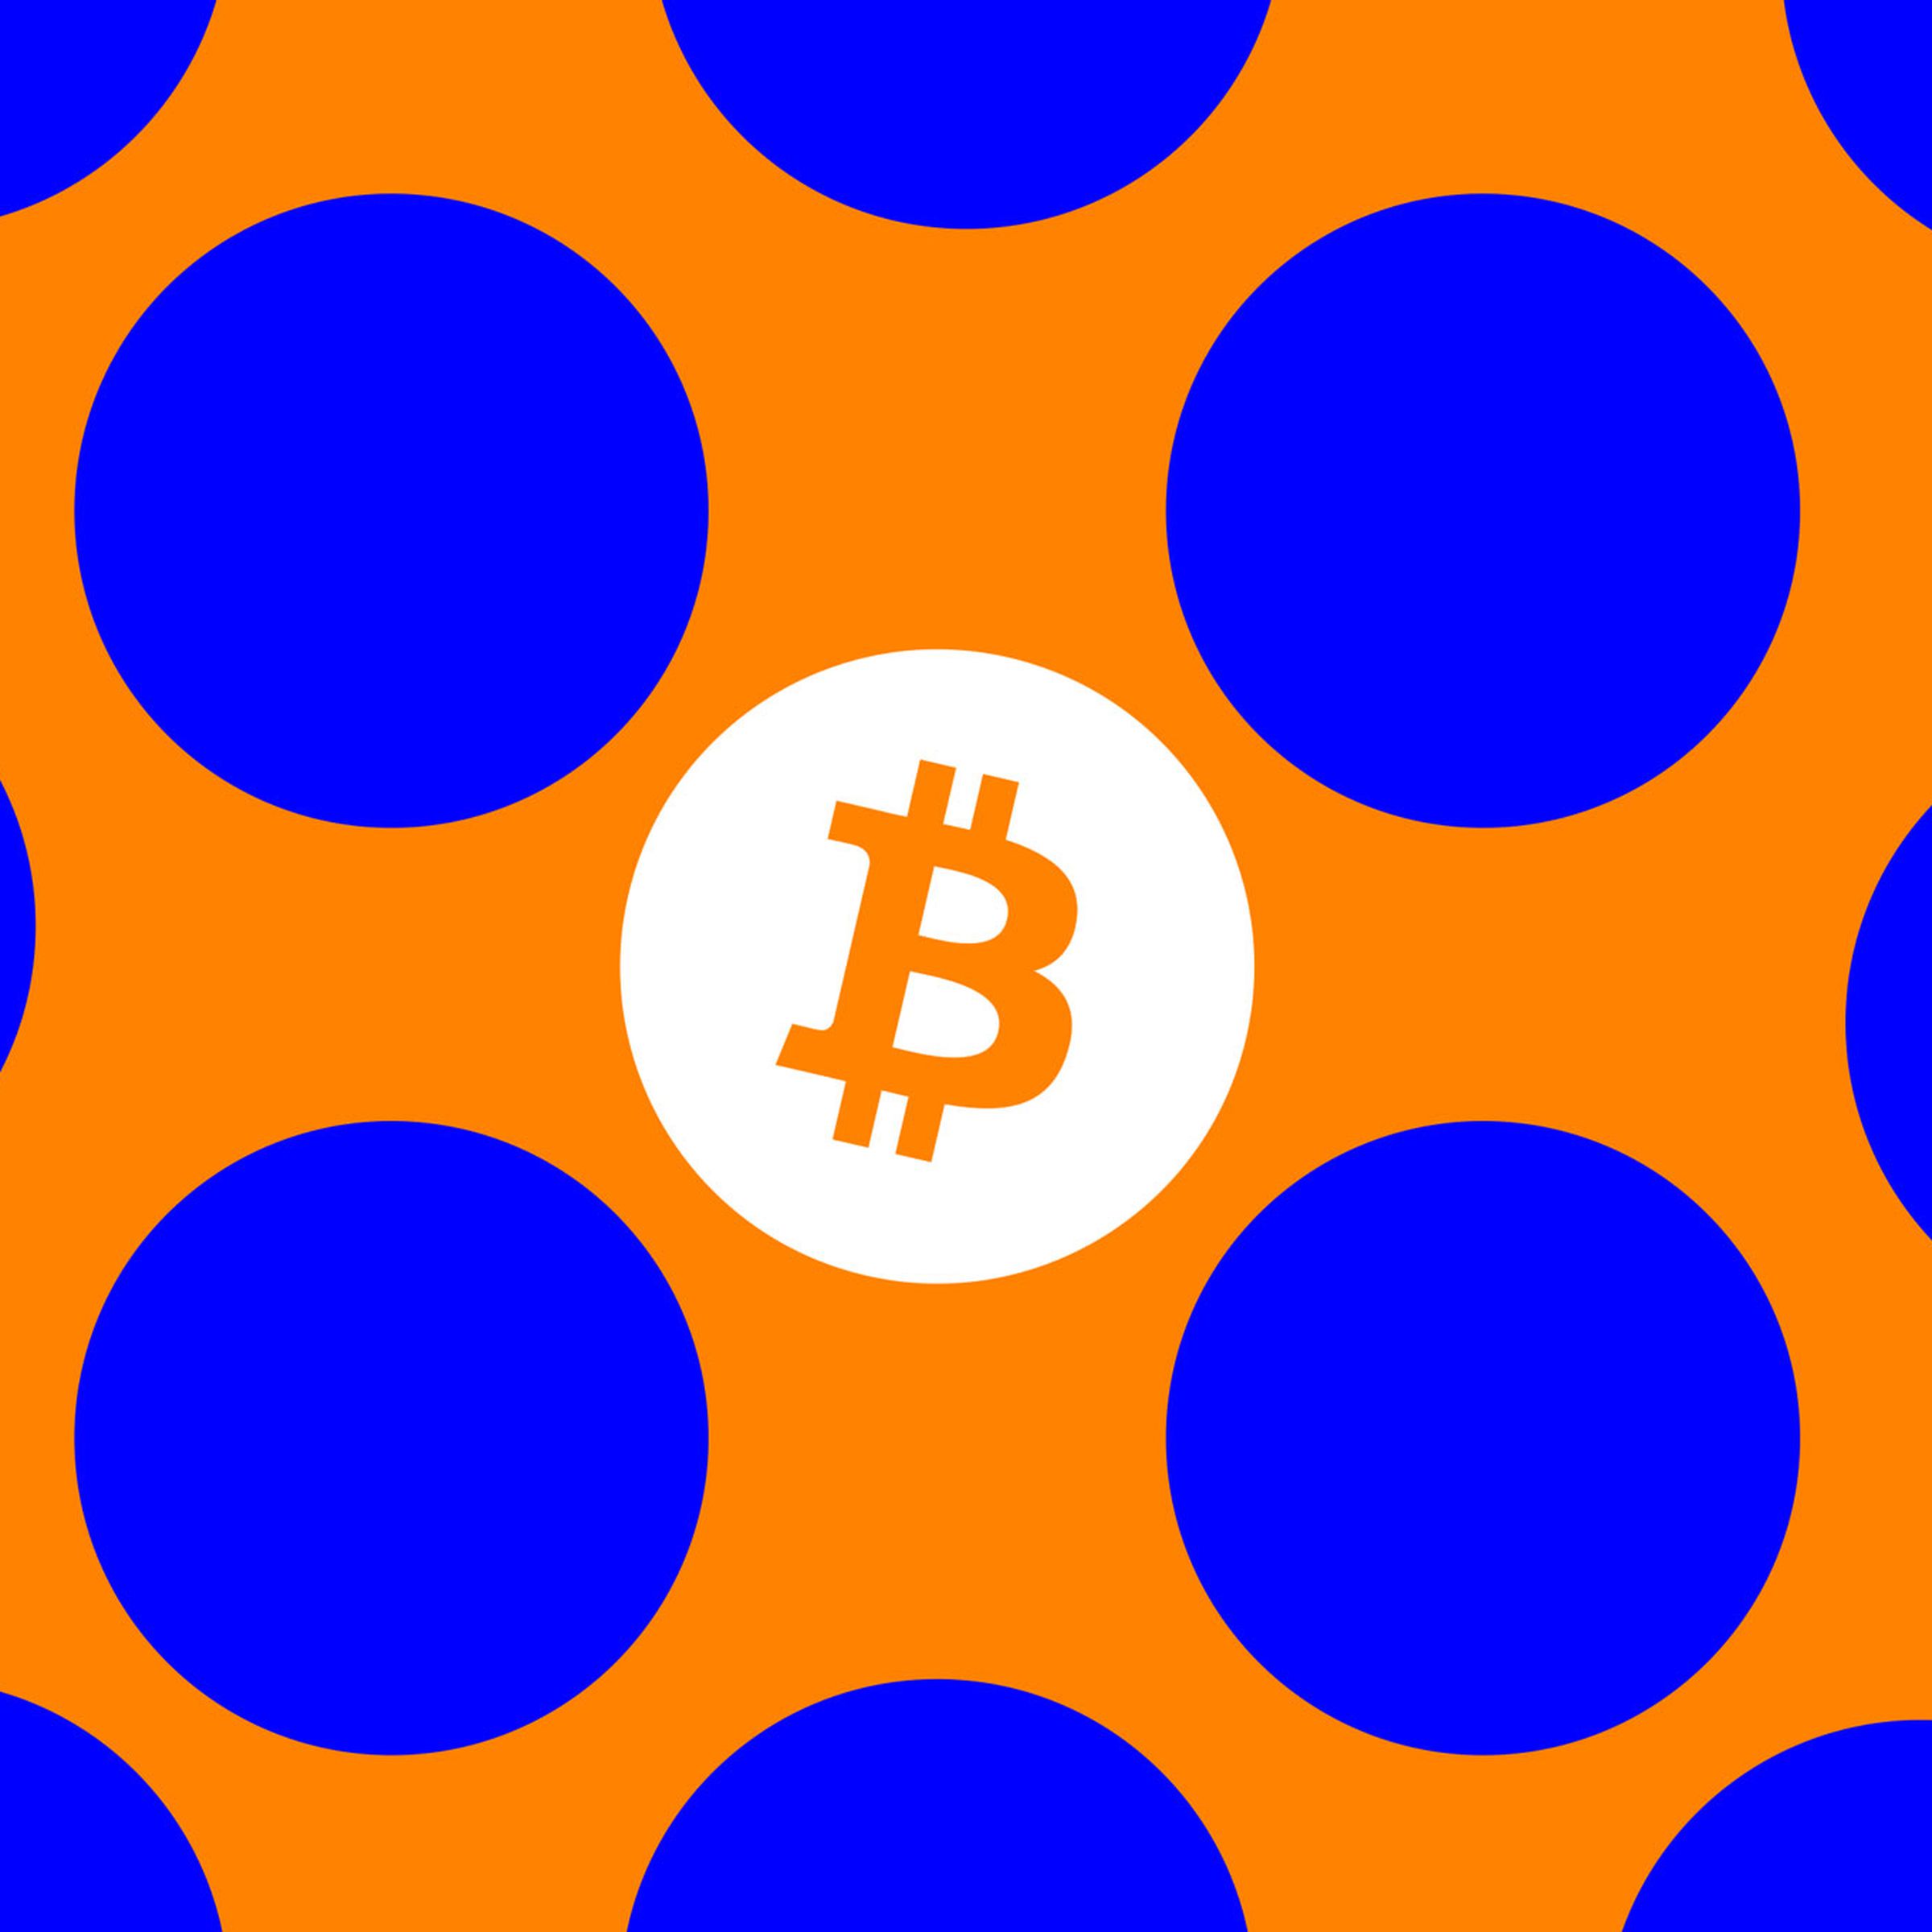 Illustration of the Bitcoin symbol on a blue and orange polka dot background.